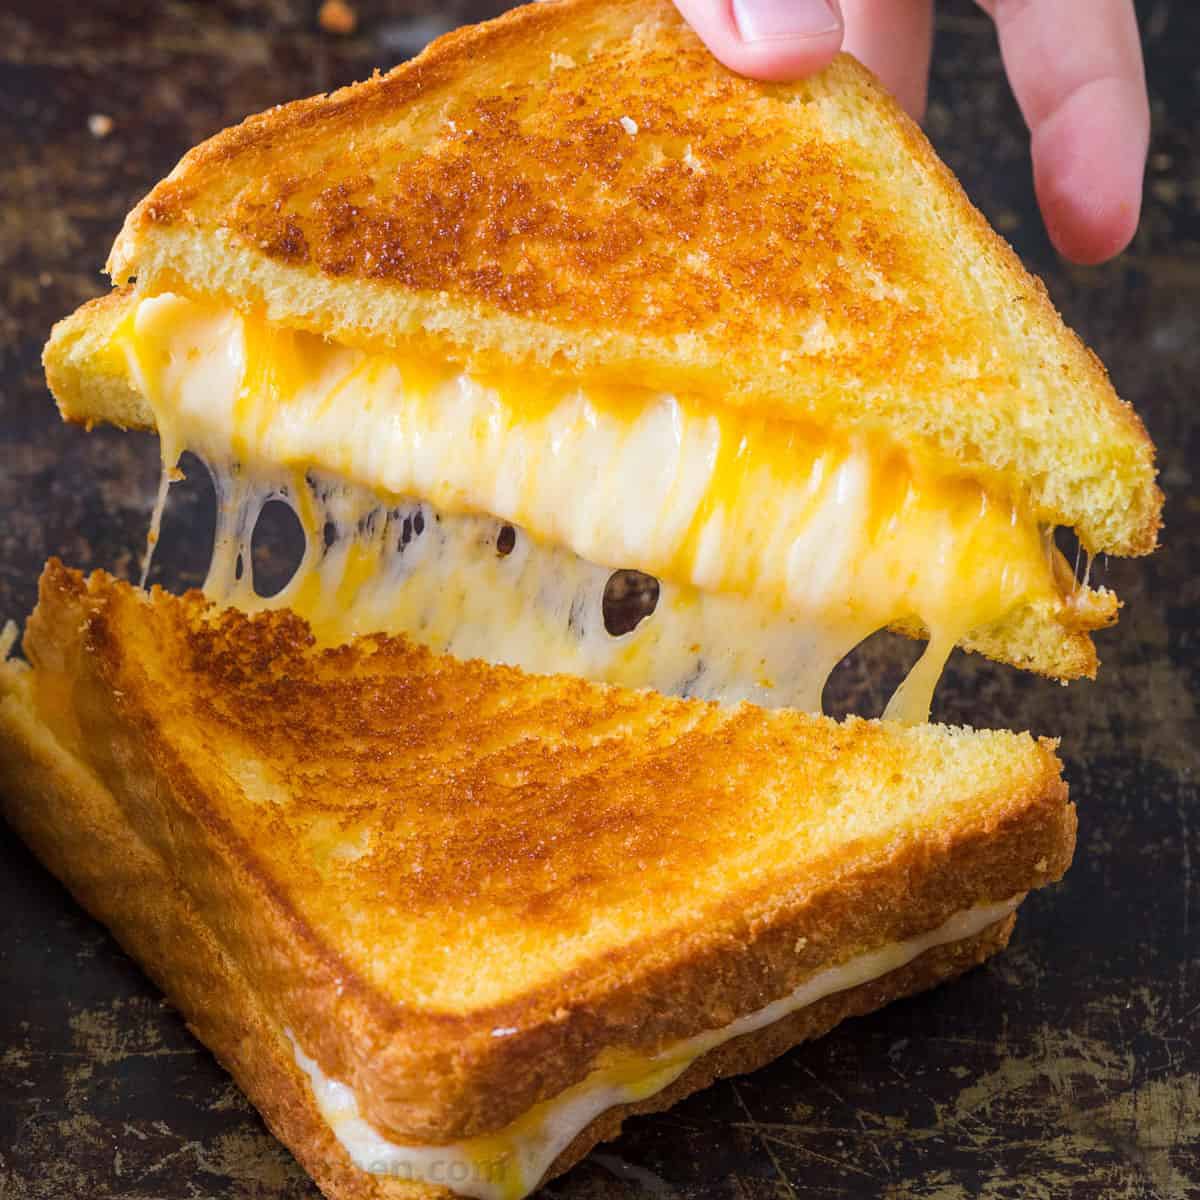 Today is #GrilledCheeseSandwichDay which I love! 😍😍👏👏👏
Today is also #NationalLicoriceDay which I love all the flavors, but not the black ones. I have tried to enjoy them, but it’s just not working out 😂🤦‍♂️
I hope you have a good day 💙😎✌️